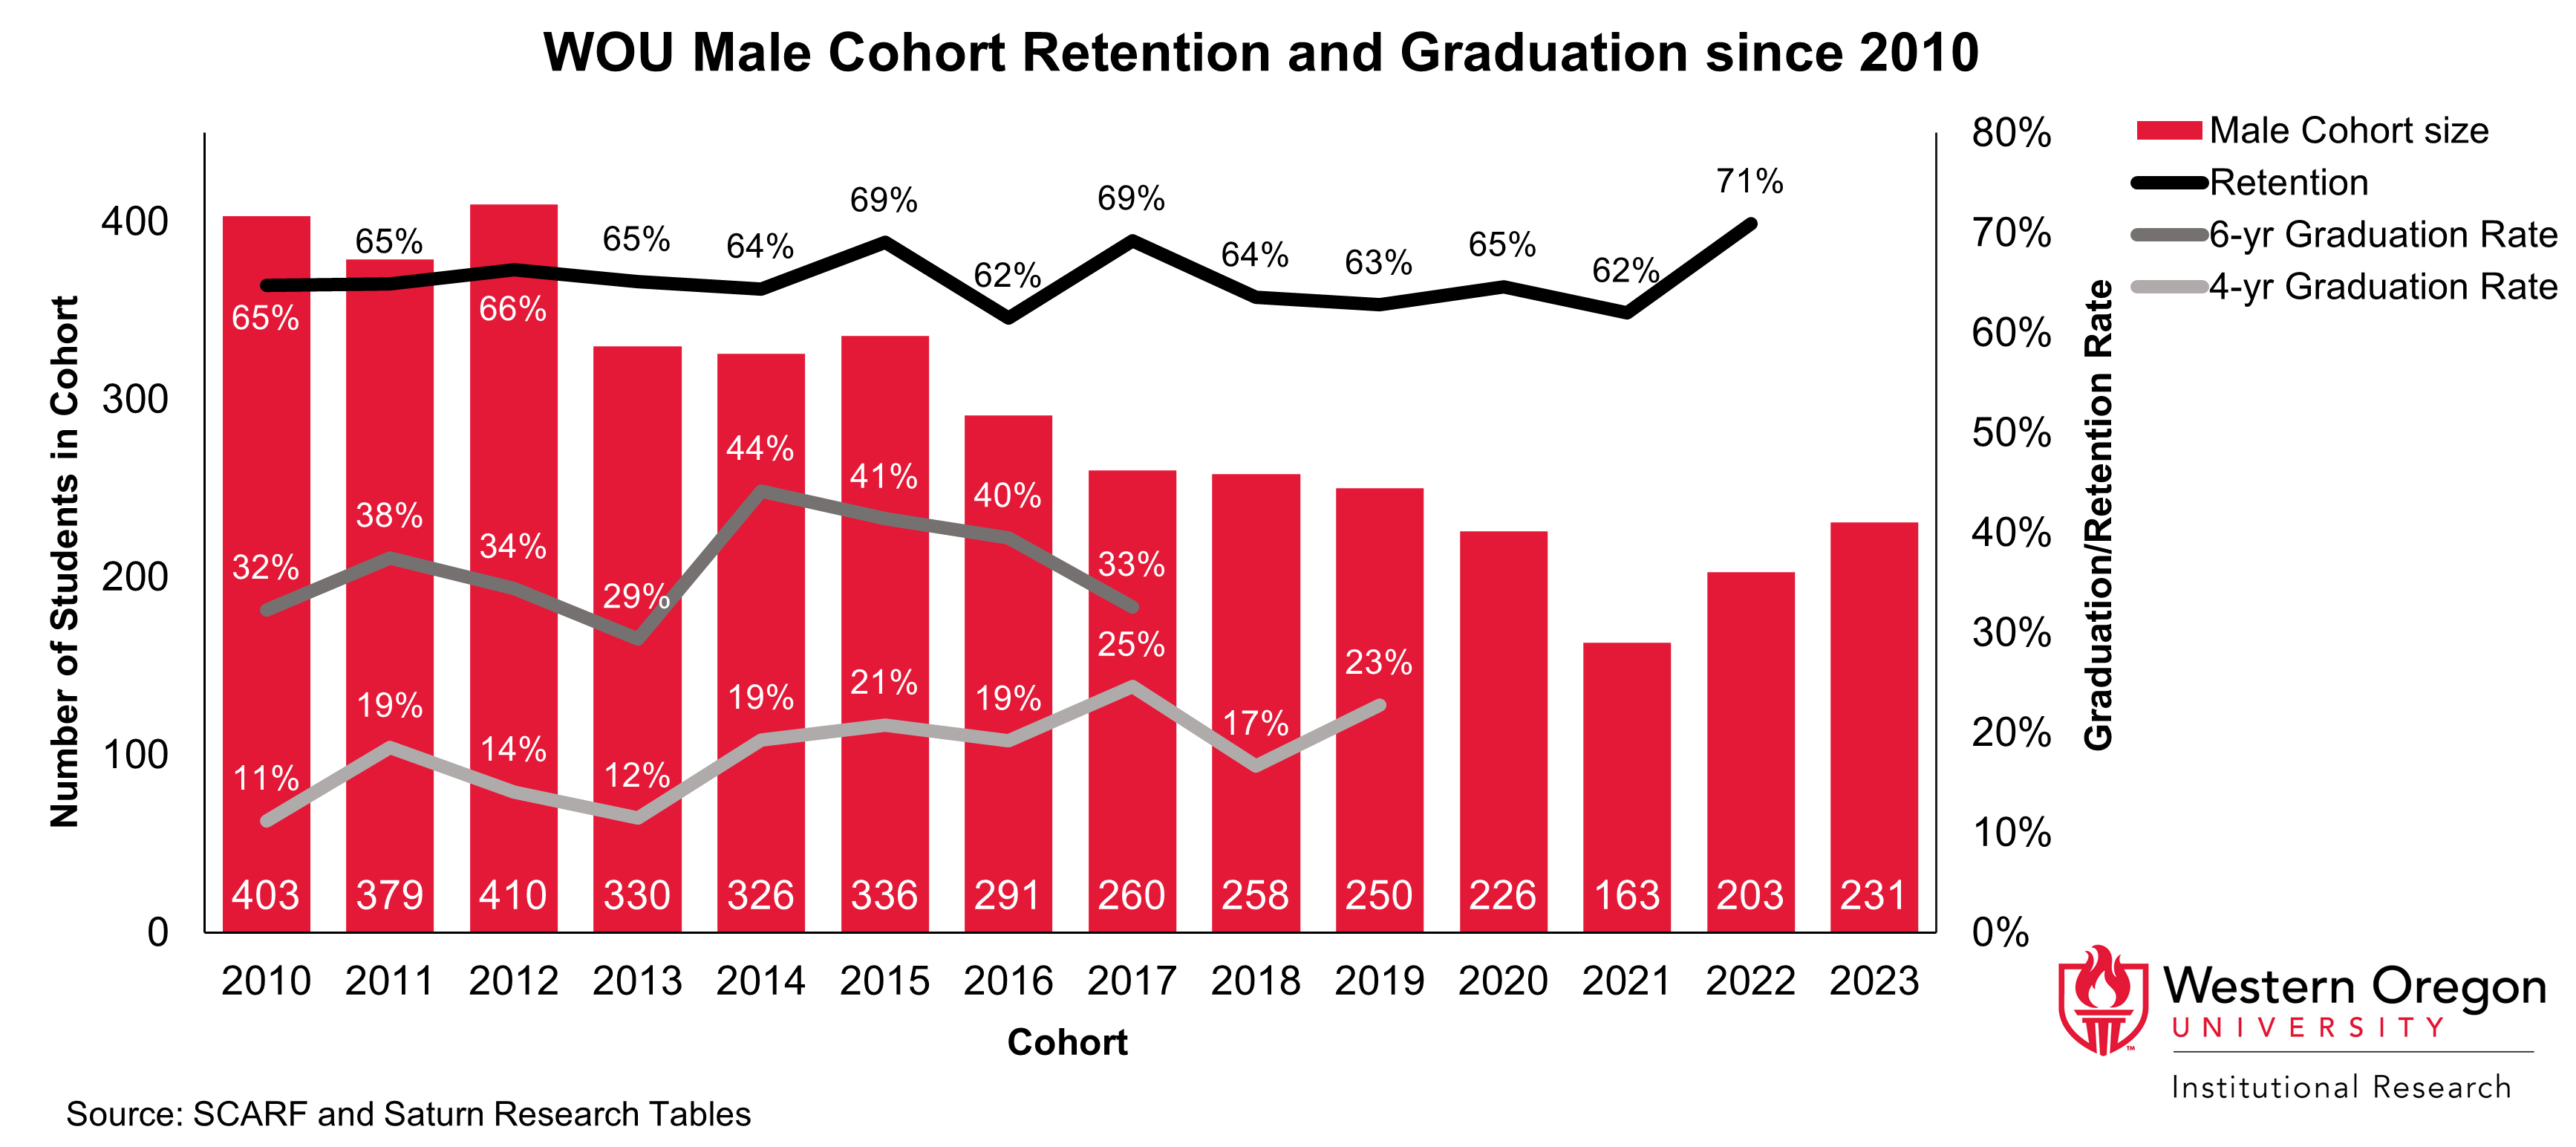 Bar and line graph of retention and 4- and 6-year graduation rates since 2010 for WOU students that are male, showing that 4-year graduation rates and retention rates have increased overall.